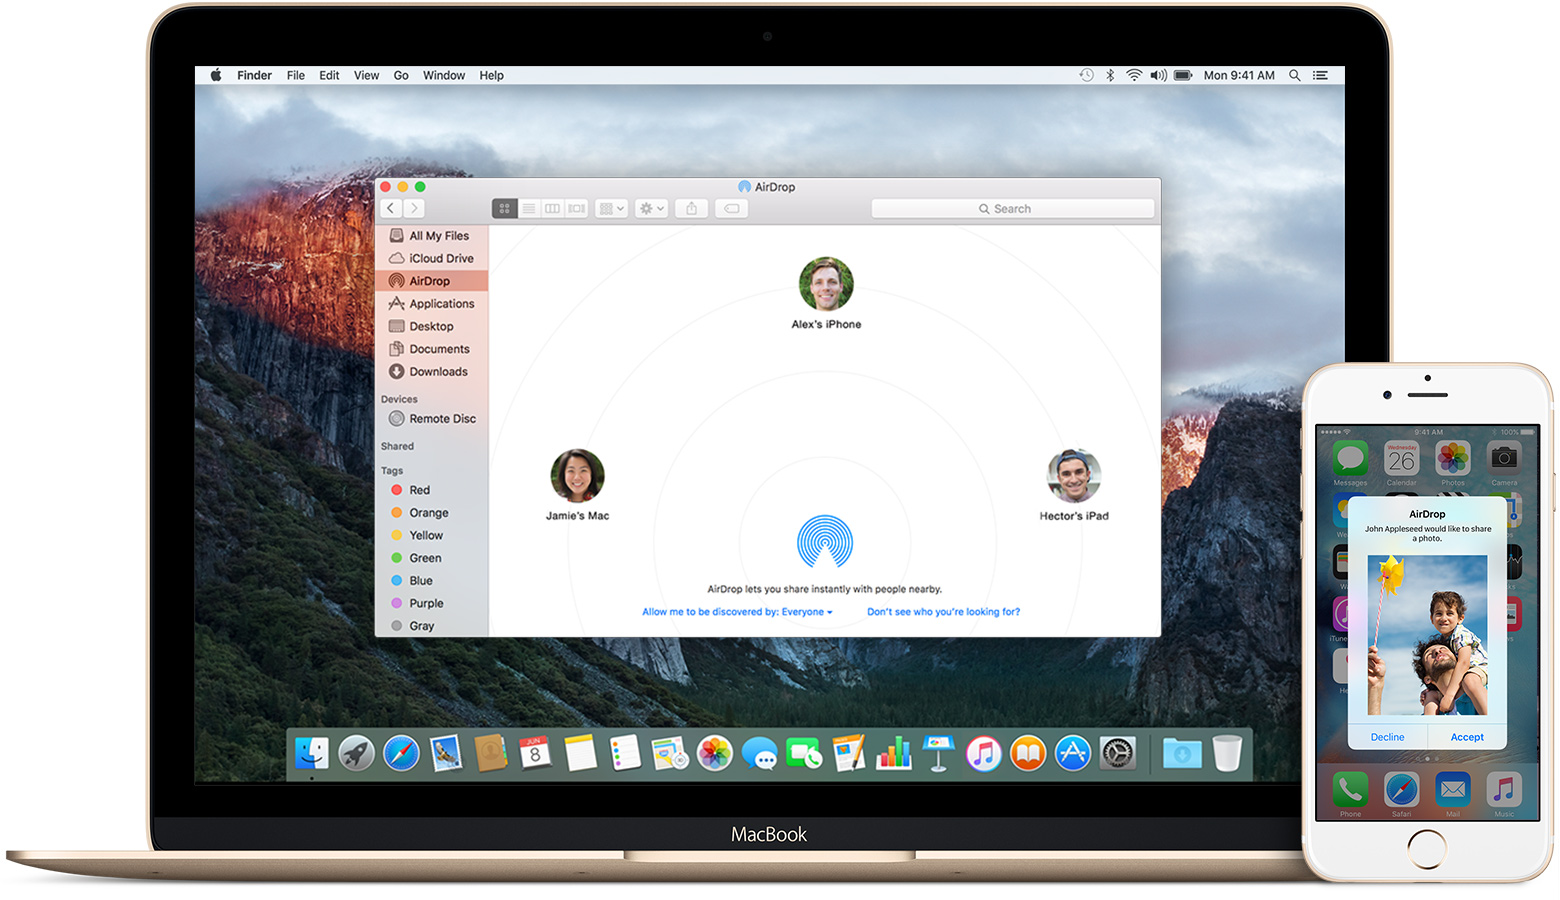 Here is how to fix AirDrop not working on iPhone, iPad, or Mac